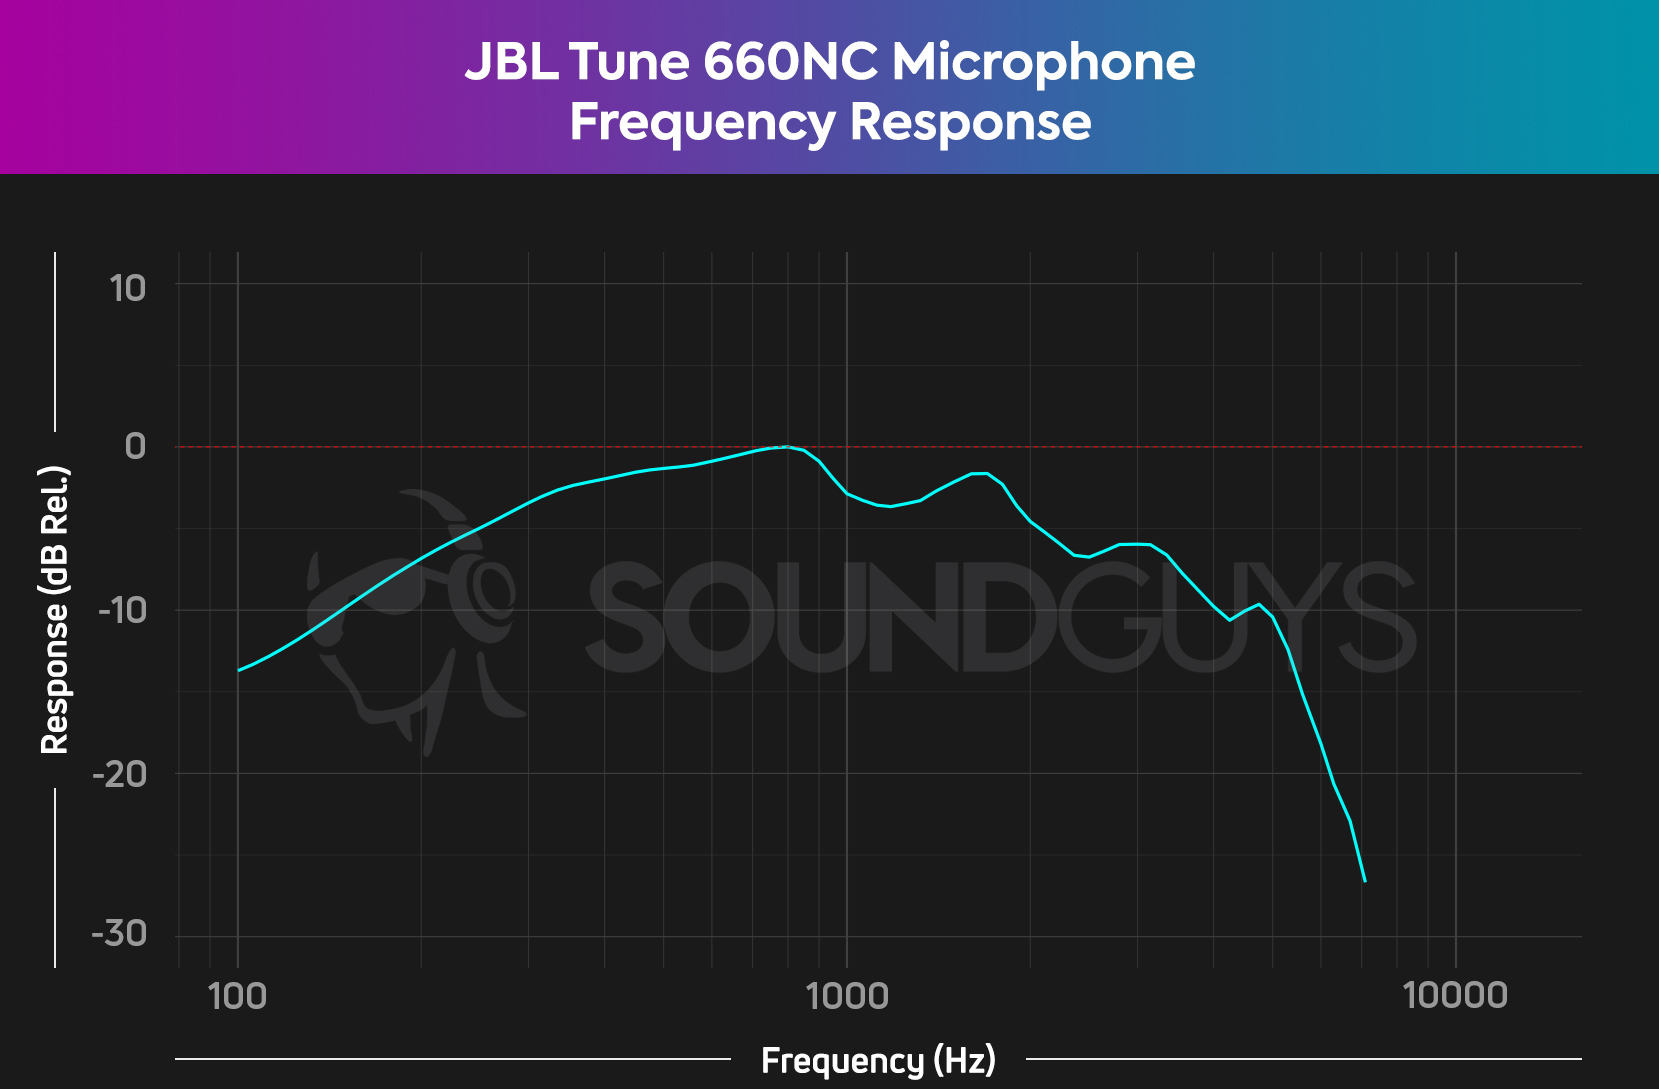 A chart showing the microphone frequency response of the JBL Tune 660NC